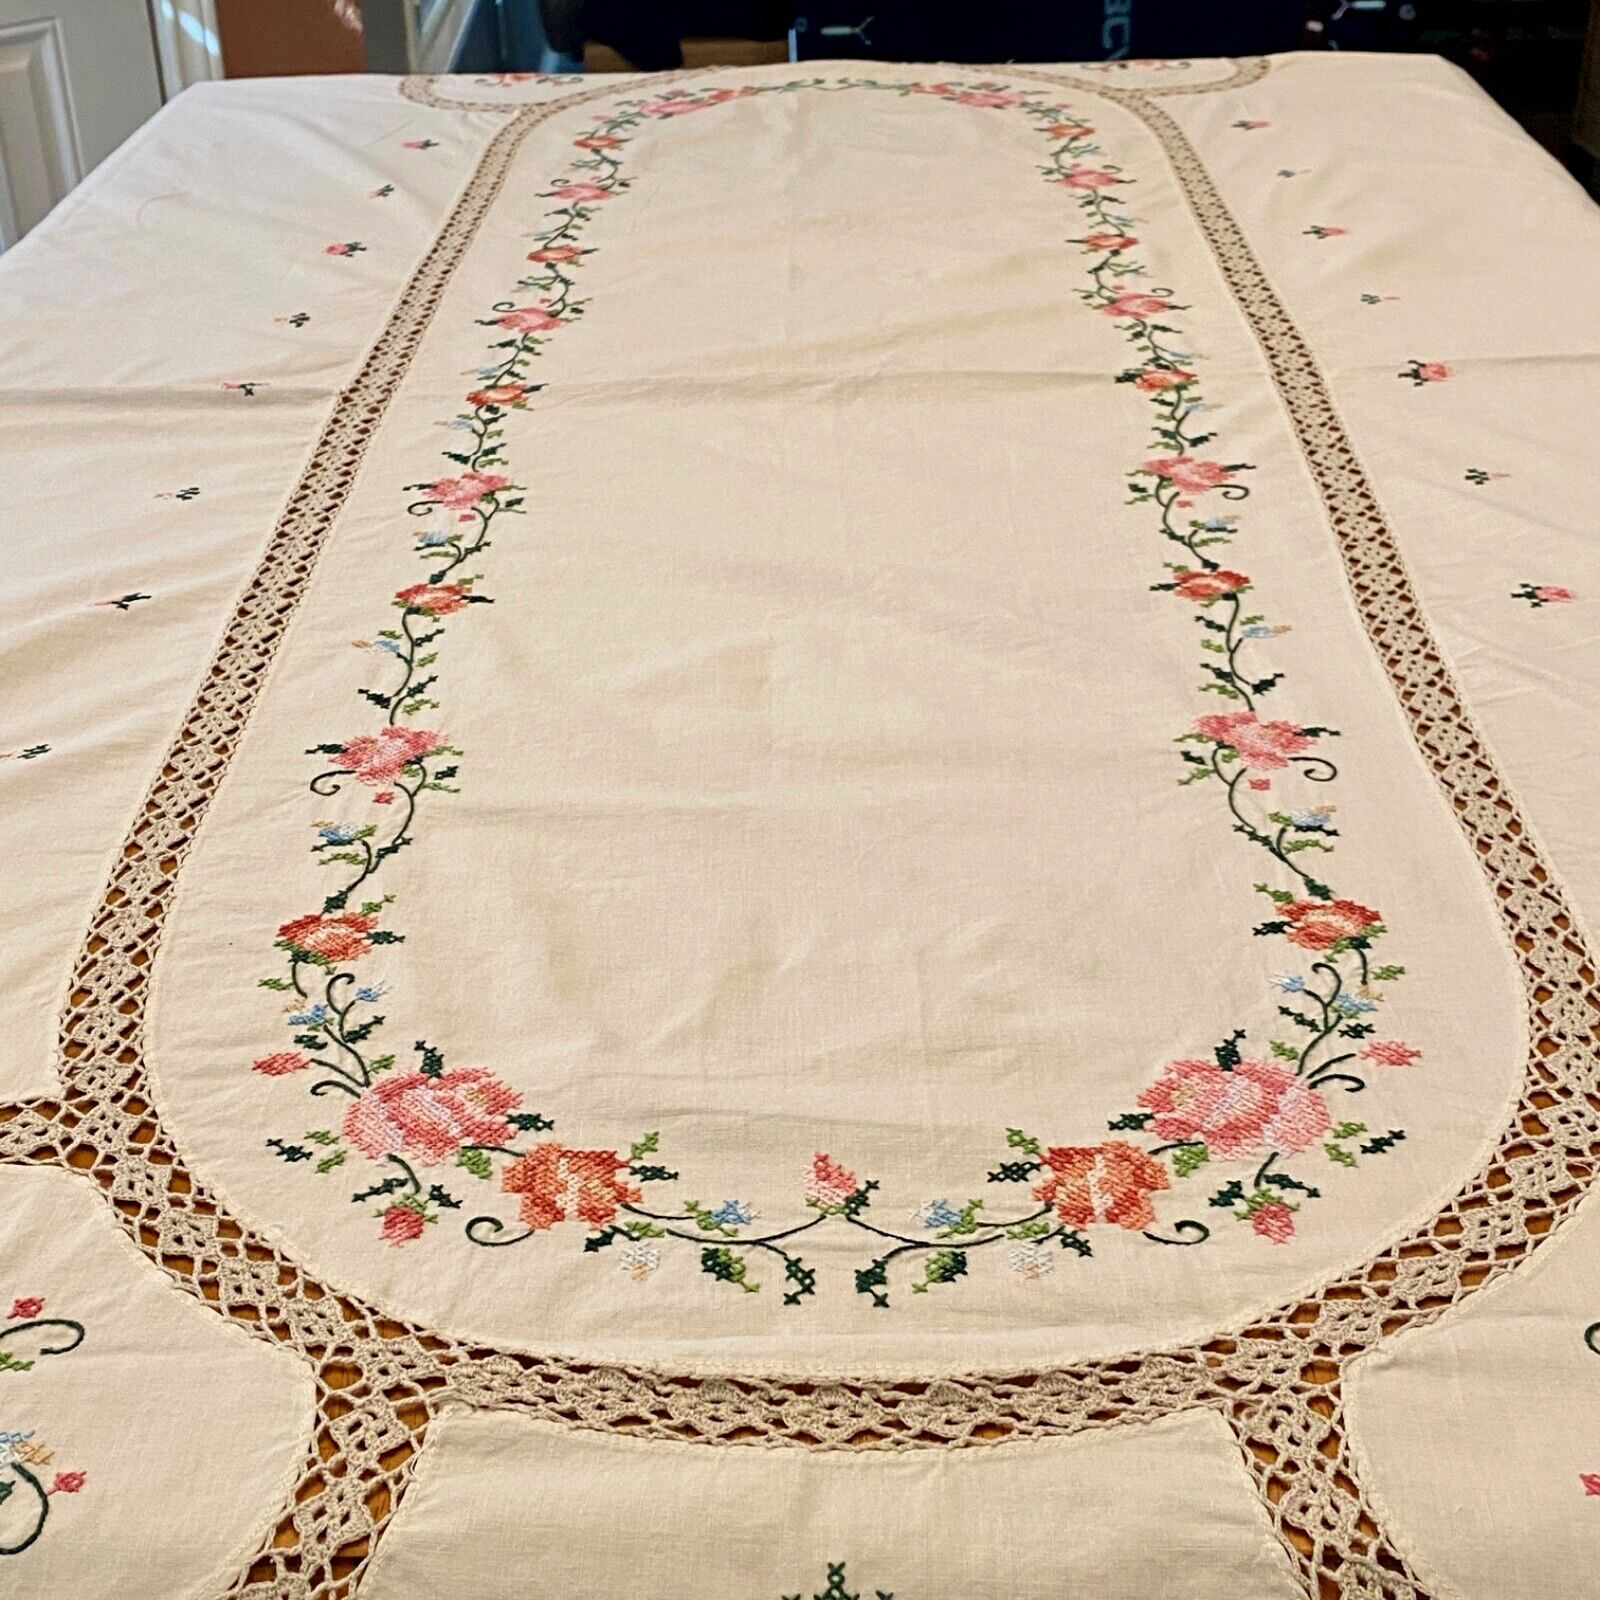 VTG Hand embroidered Cross stitch Tablecloth Hand Crochet Lace 65 X 96 Seats 6-8